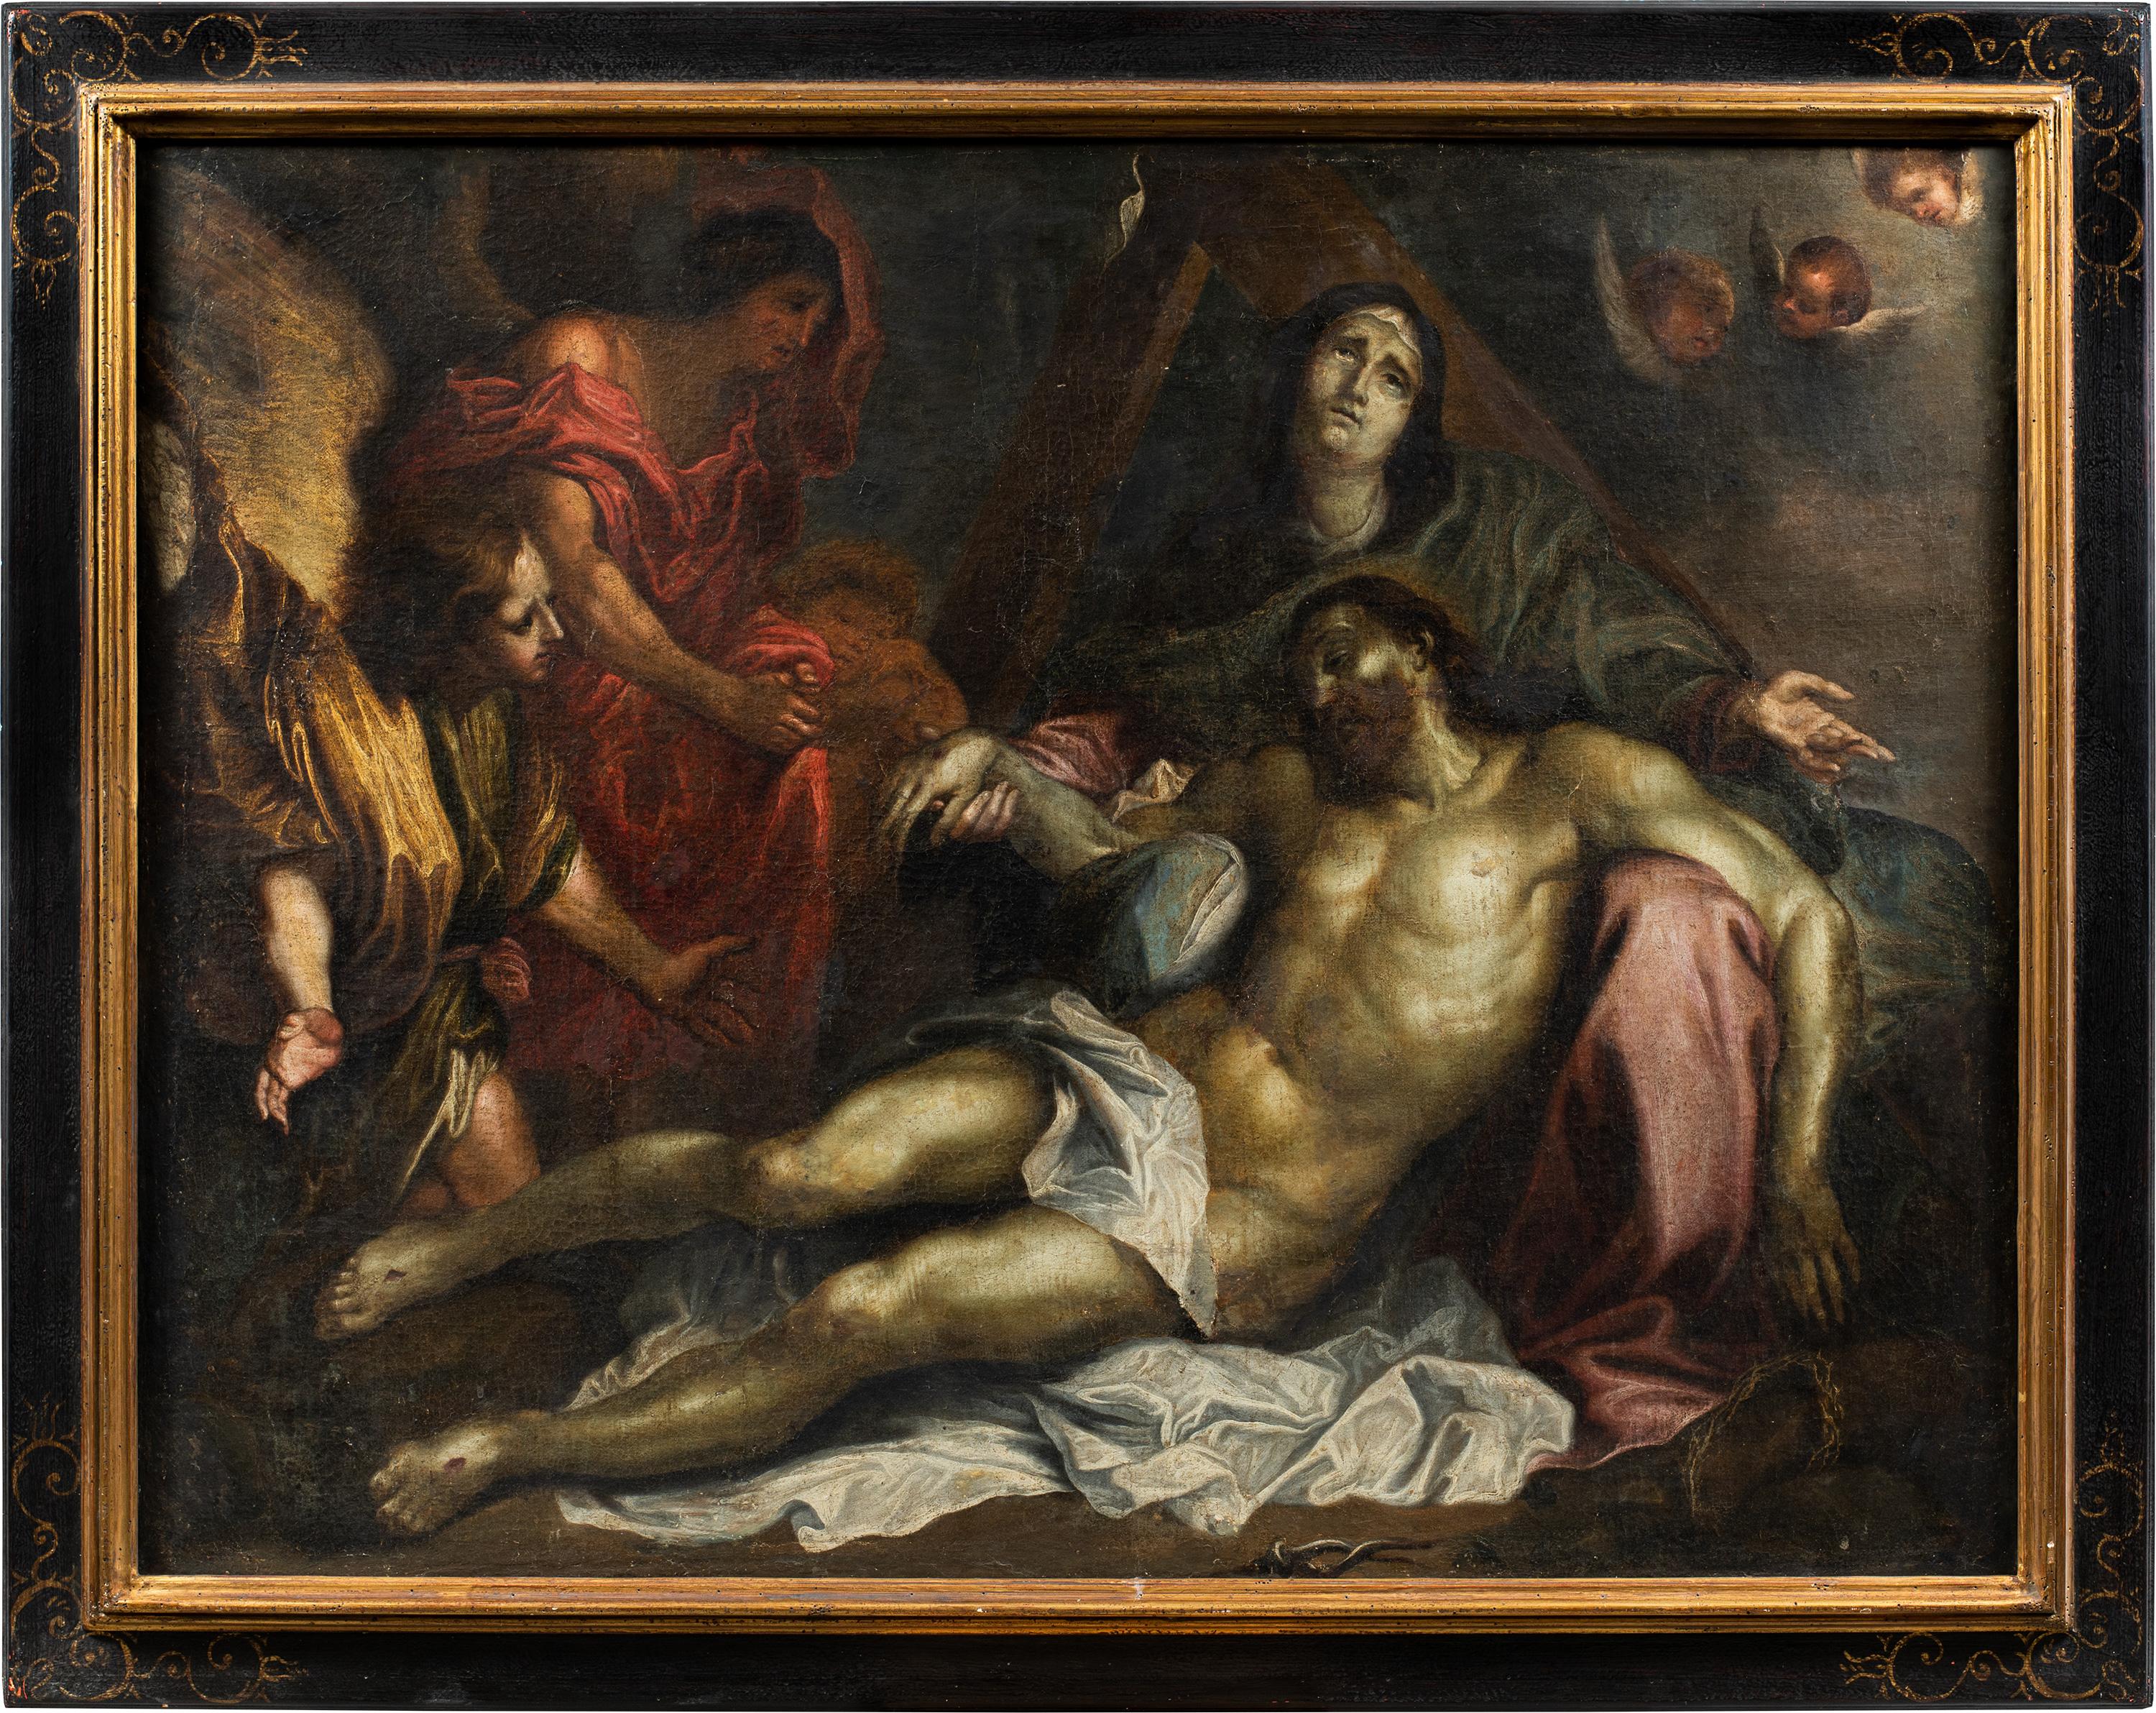 Follower of Sir Anthony Van Dyck (17th century) - The Deposition.

100 x 130 cm without frame, 117 x 147 cm with frame.

Antique oil painting on canvas, in a lacquered and gilded wooden frame (some chipping).

- The work takes inspiration from the